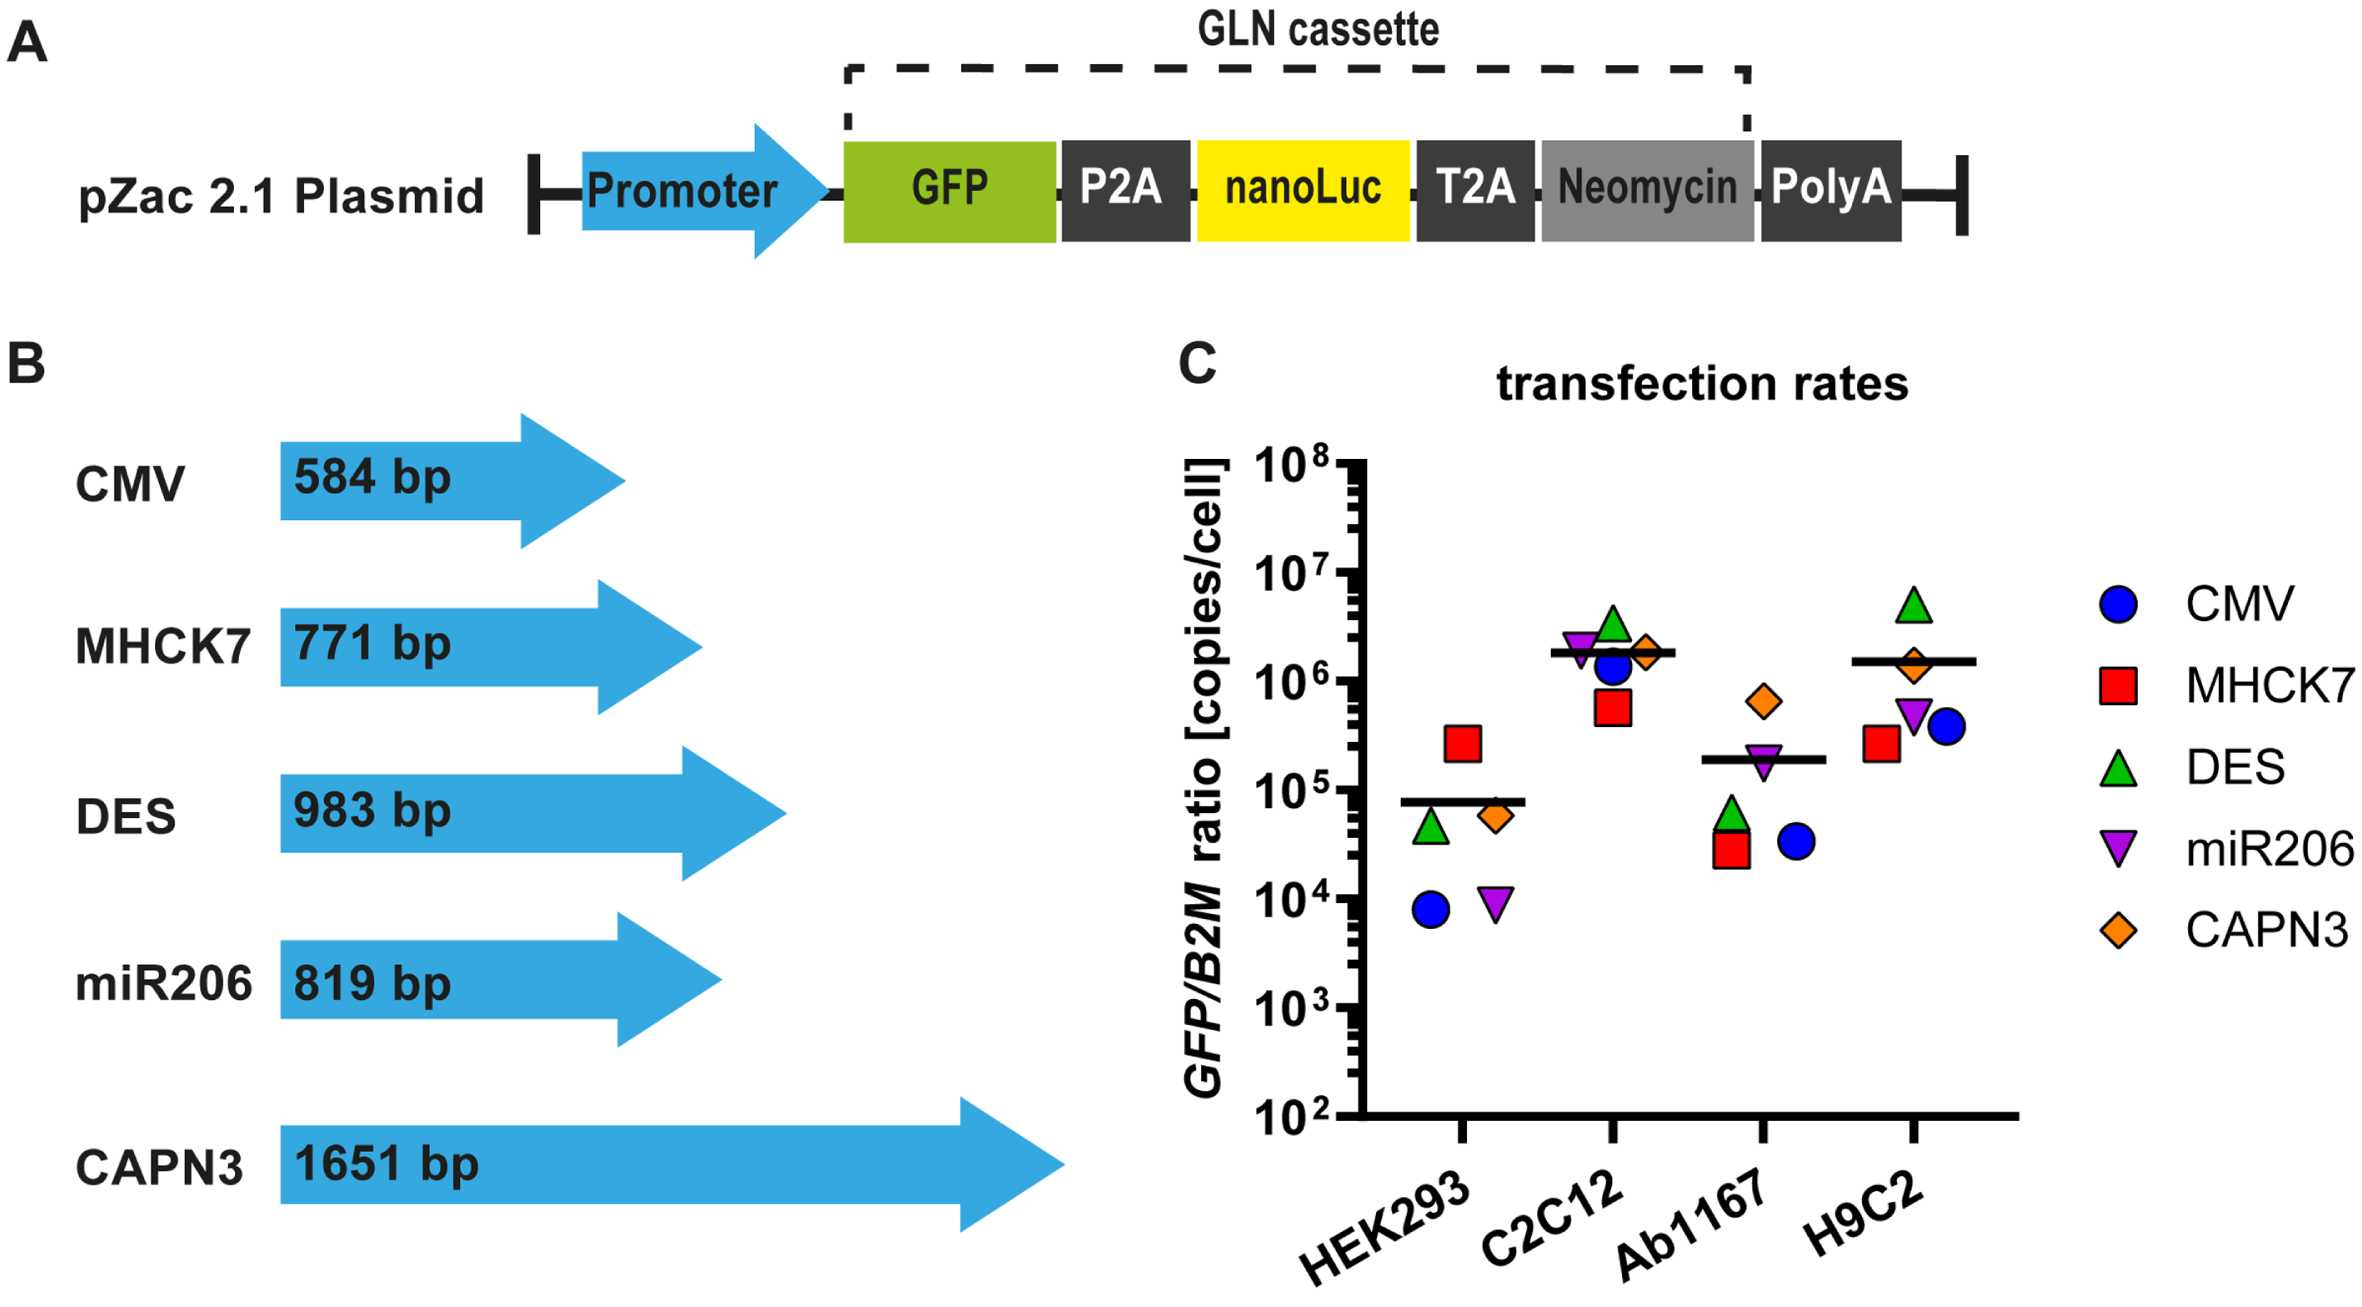 Muscle specific promotors and plasmid transfection ratios. (A) The pZac2.1 plasmid containing the respective promotor sequence and the GLN expression cassette. (B) Four muscle specific promotors (MHCK7, DES, miR206 and CAPN3) were tested and compared to a ubiquitous promotor (CMV). Blue arrows represent the relative lengths of promotor sequences. (C) Plasmid transfection protocols were adjusted for HEK293, C2C12, HSKM-Ab1167 and H9C2 cell types and transfection ratios were measured by qPCR for tEGFP in relation to B2M housekeeping gene. Scatter dot plot shows mean GFP/B2M ratios of the respective reporter plasmids in the given cell types (n = 4). Black lines indicate the overall mean of reporter plasmid transfection rates in each cell line.